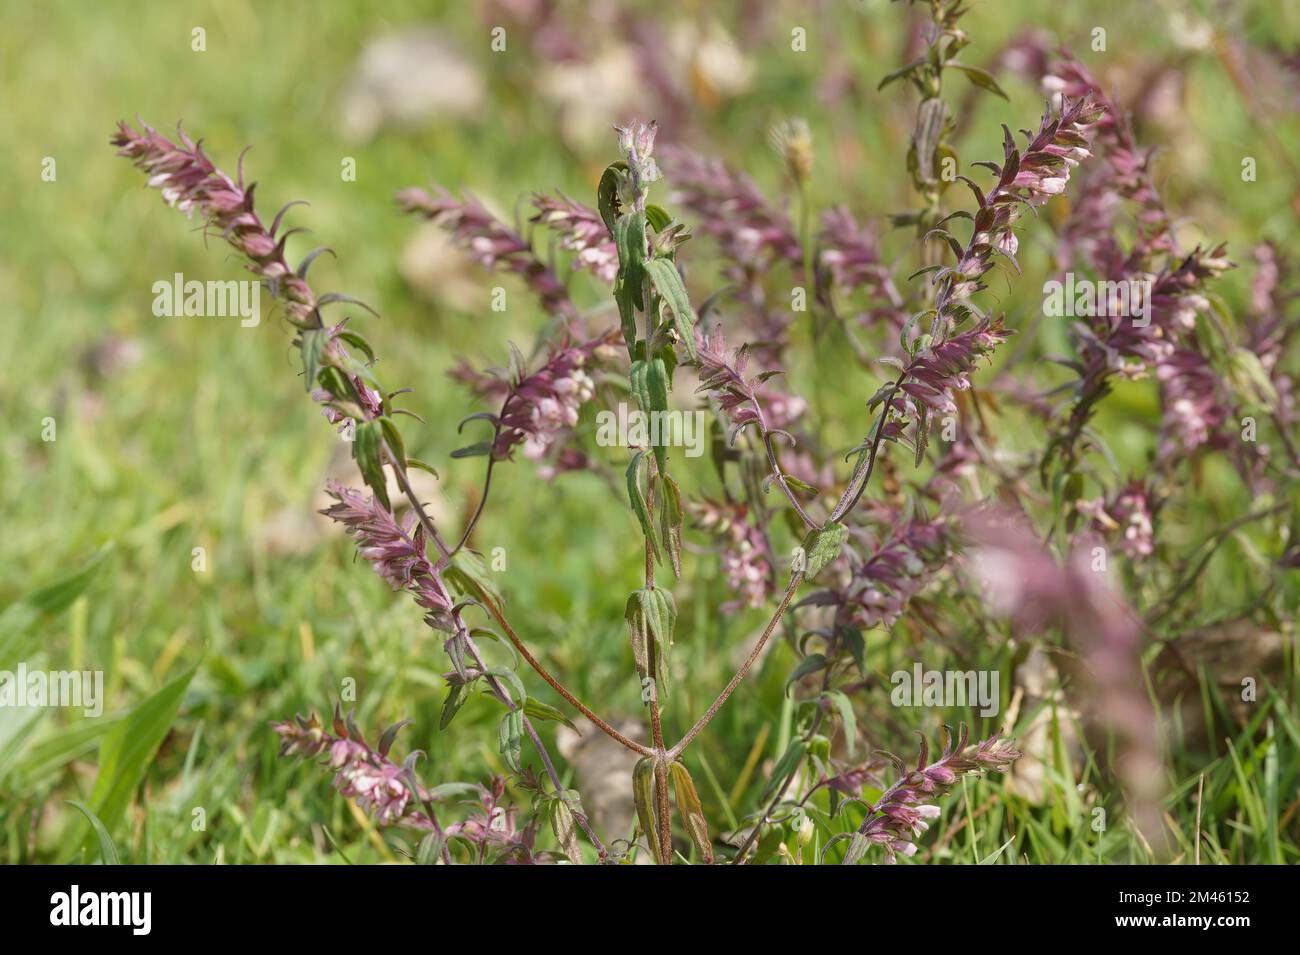 A closeup of blooming Odontites vernus flowers in blurred background Stock Photo